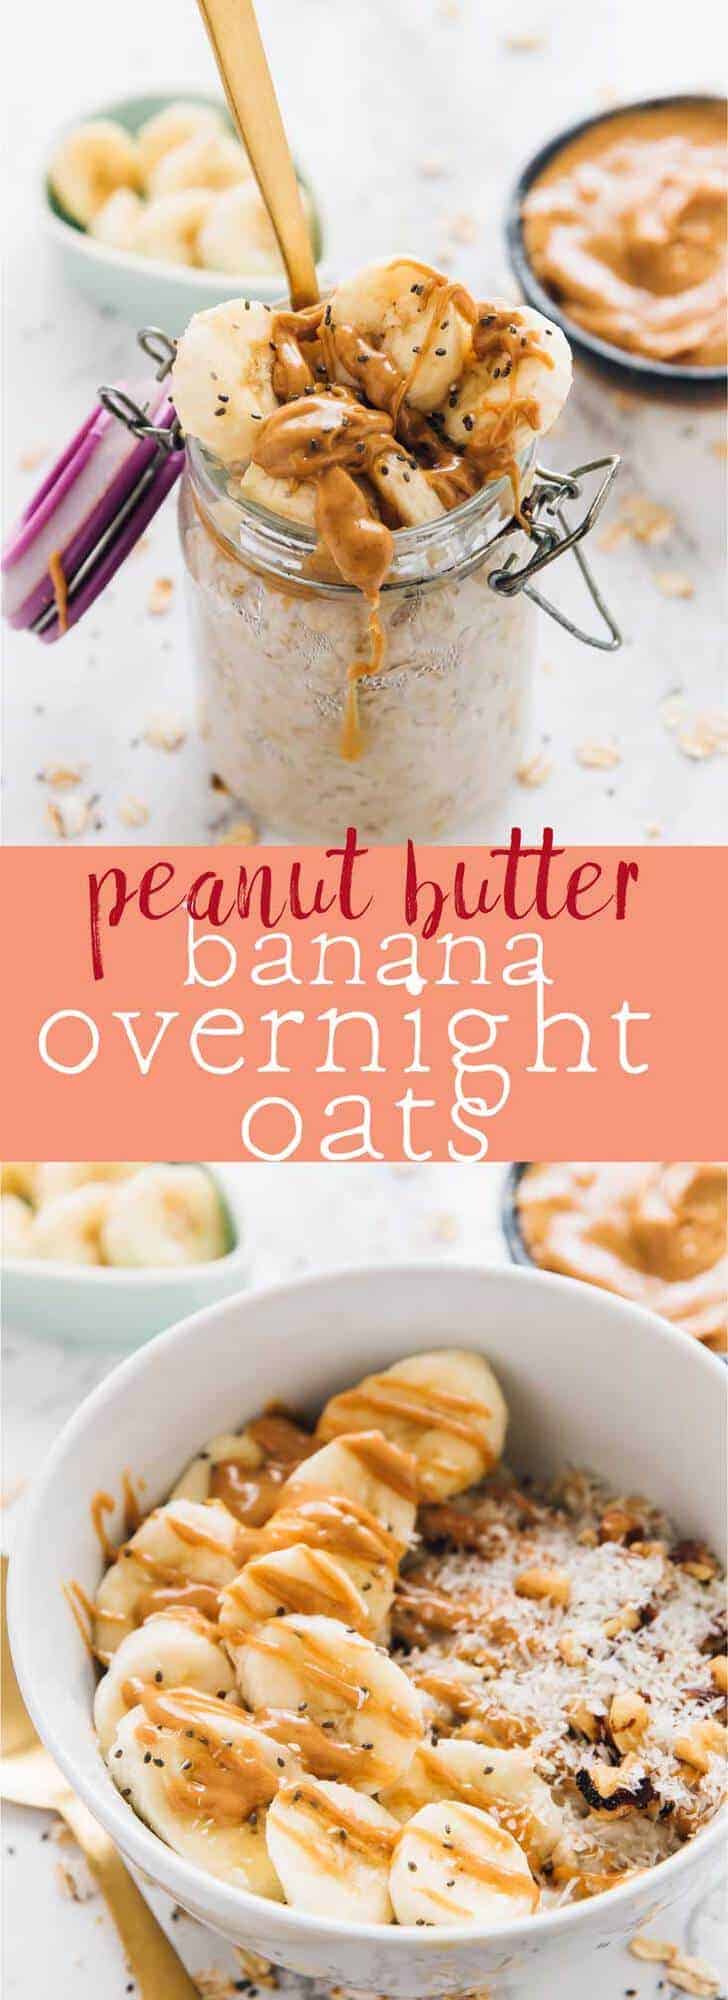 I love how easy these Peanut Butter Banana Overnight Oats are to make! They take 5 minutes to prep, and are made overnight in your fridge! via https://jessicainthekitchen.com 